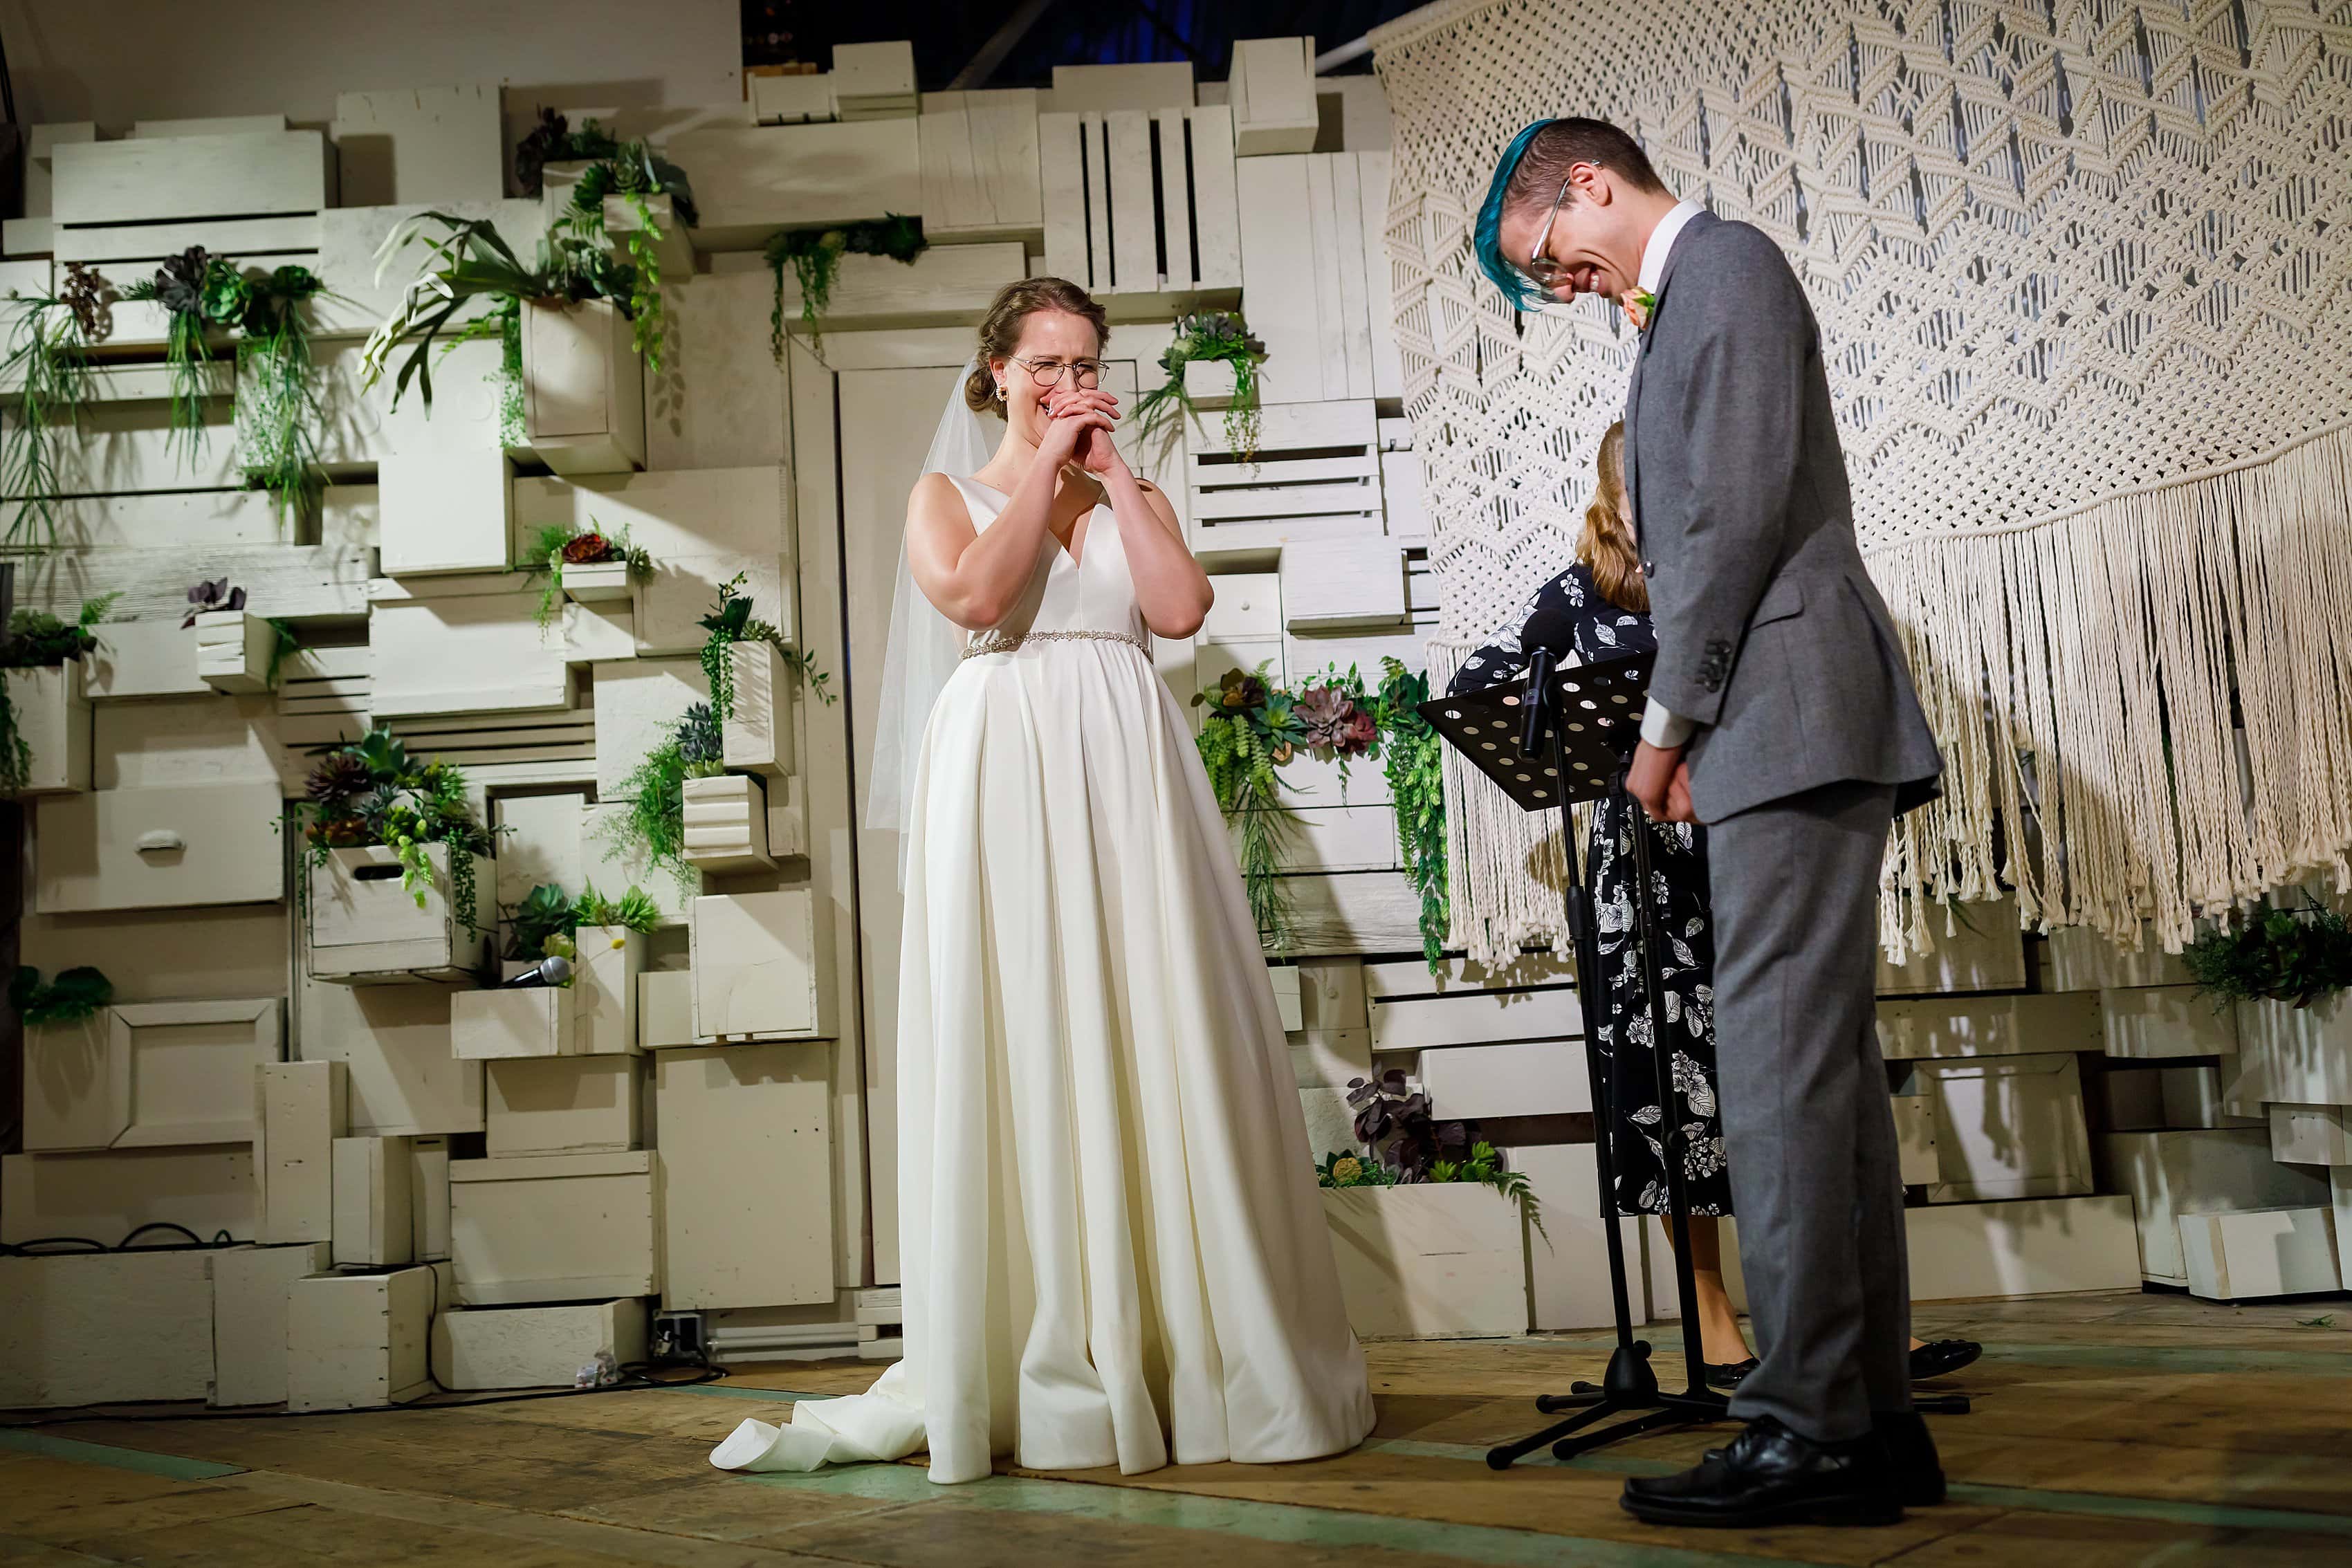 bride and groom on stage during wedding ceremony at Rust Belt Market in downtown Ferndale, Michigan